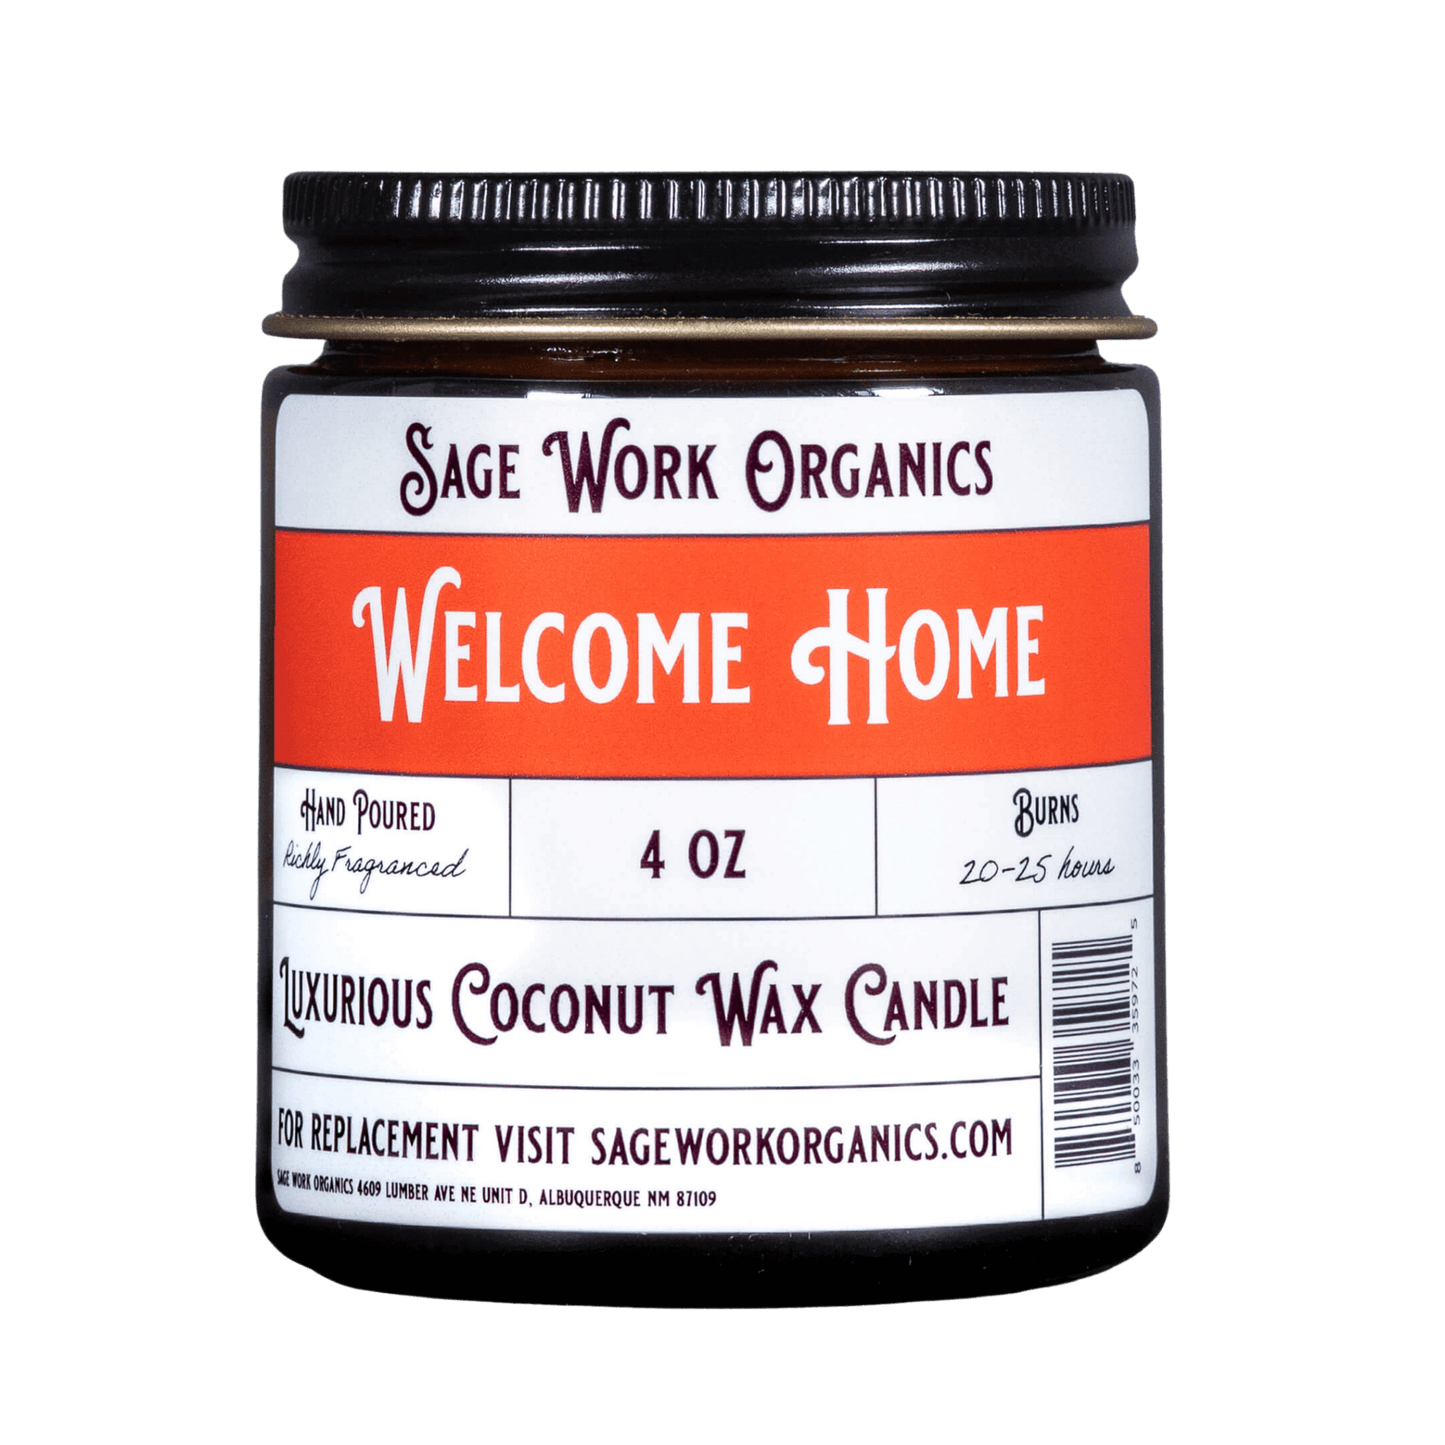 Welcome Home Candle